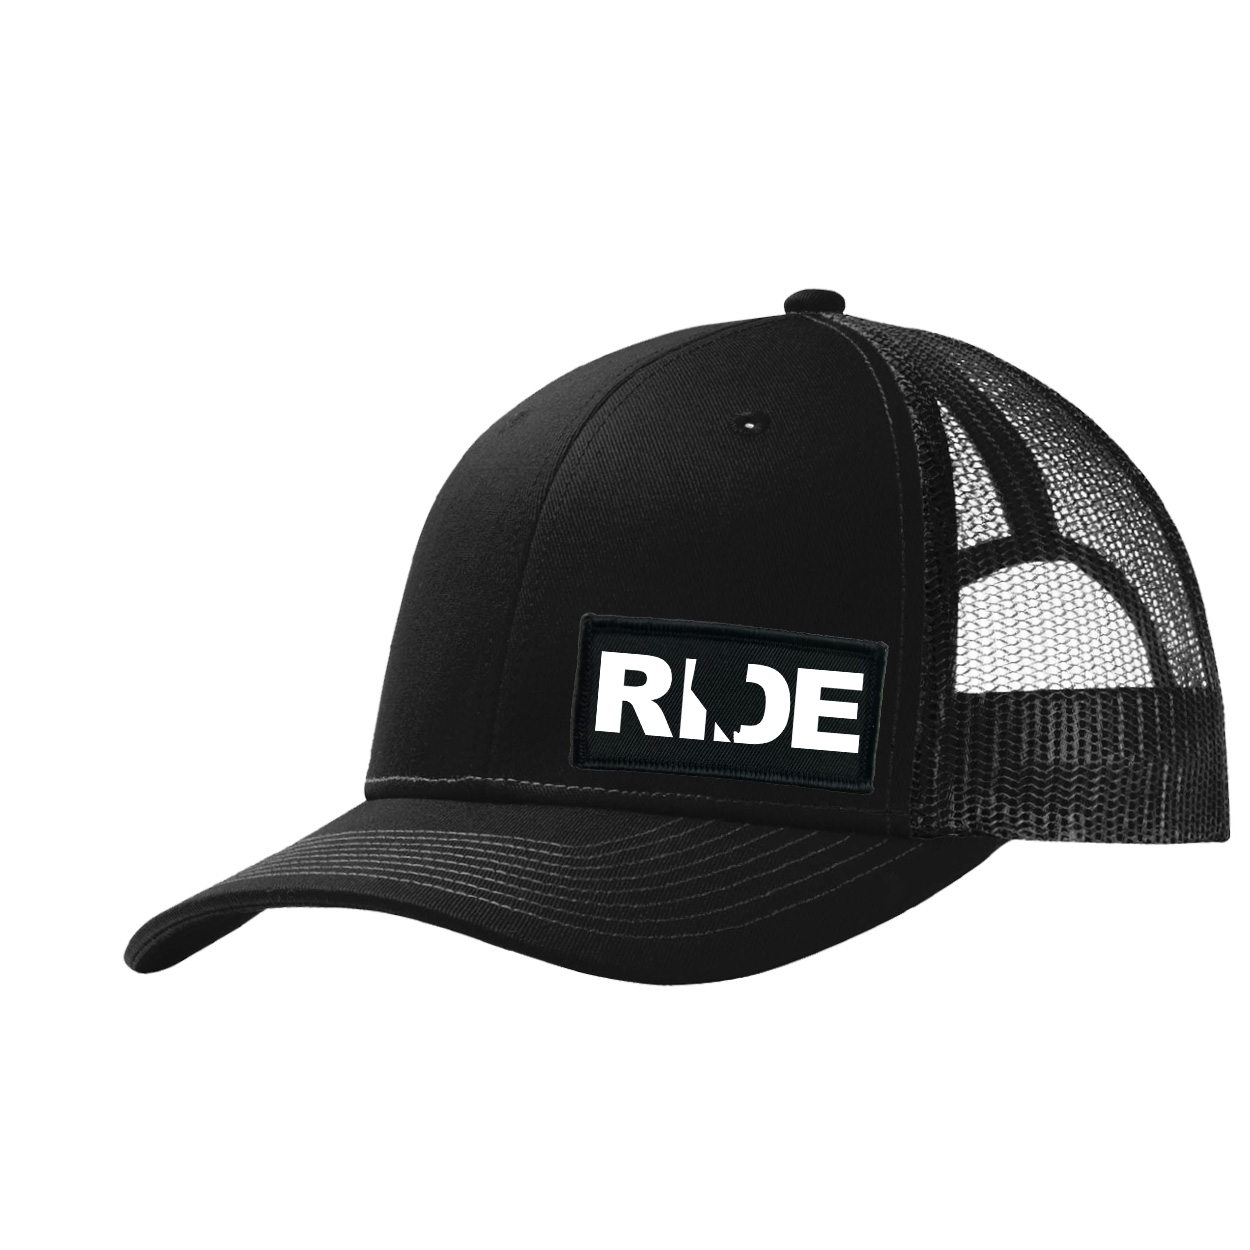 Ride Nevada Night Out Woven Patch Snapback Trucker Hat Black (White Logo)